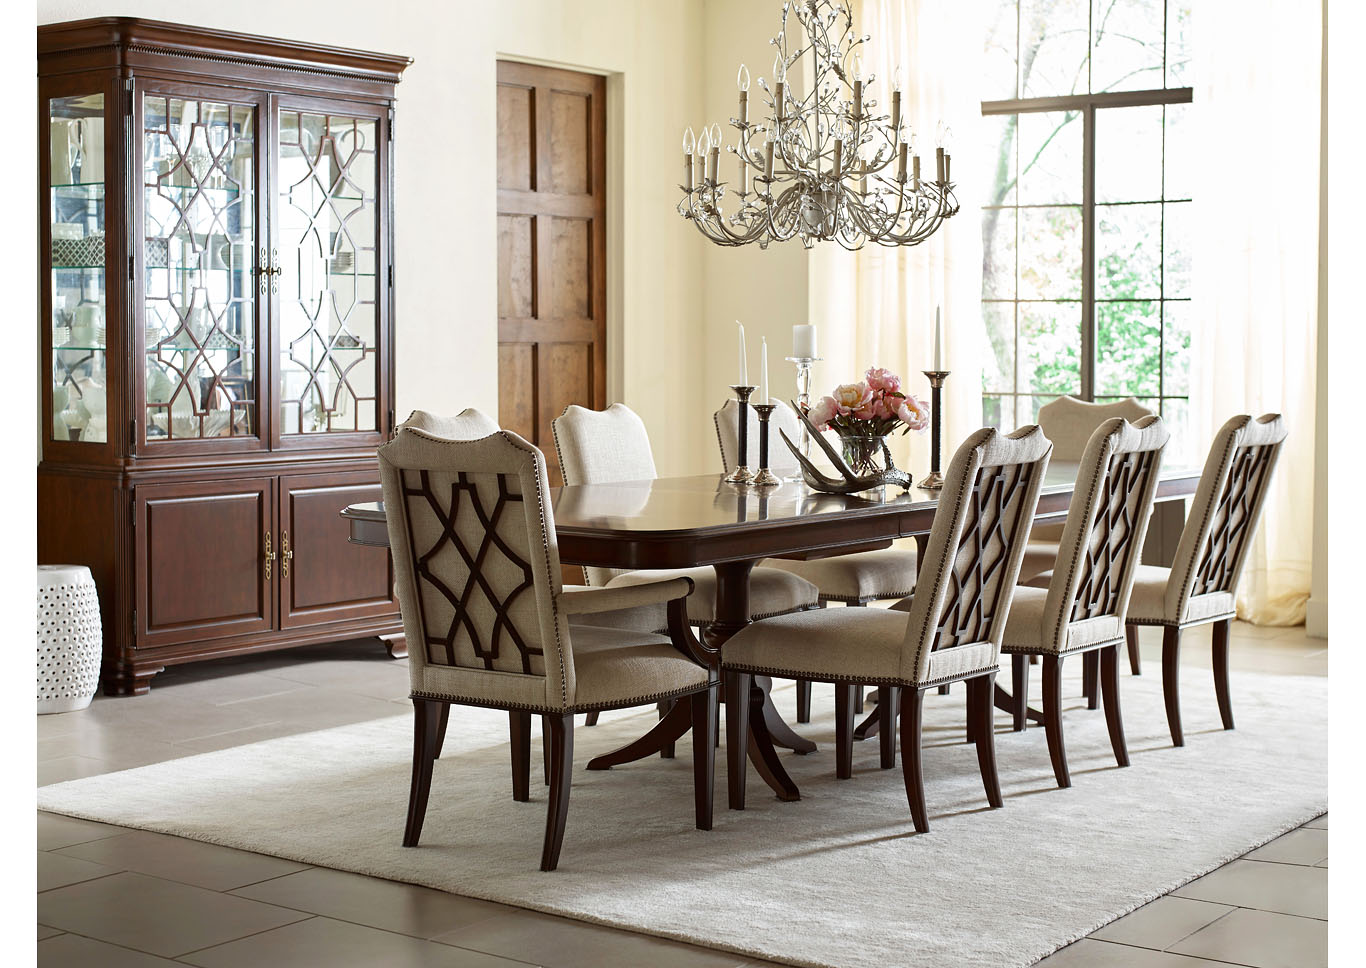 Hadleigh Classic Cherry Dining Set w/6 Upholstered Side Chairs & 2 Upholstered Arm Chairs,Kincaid